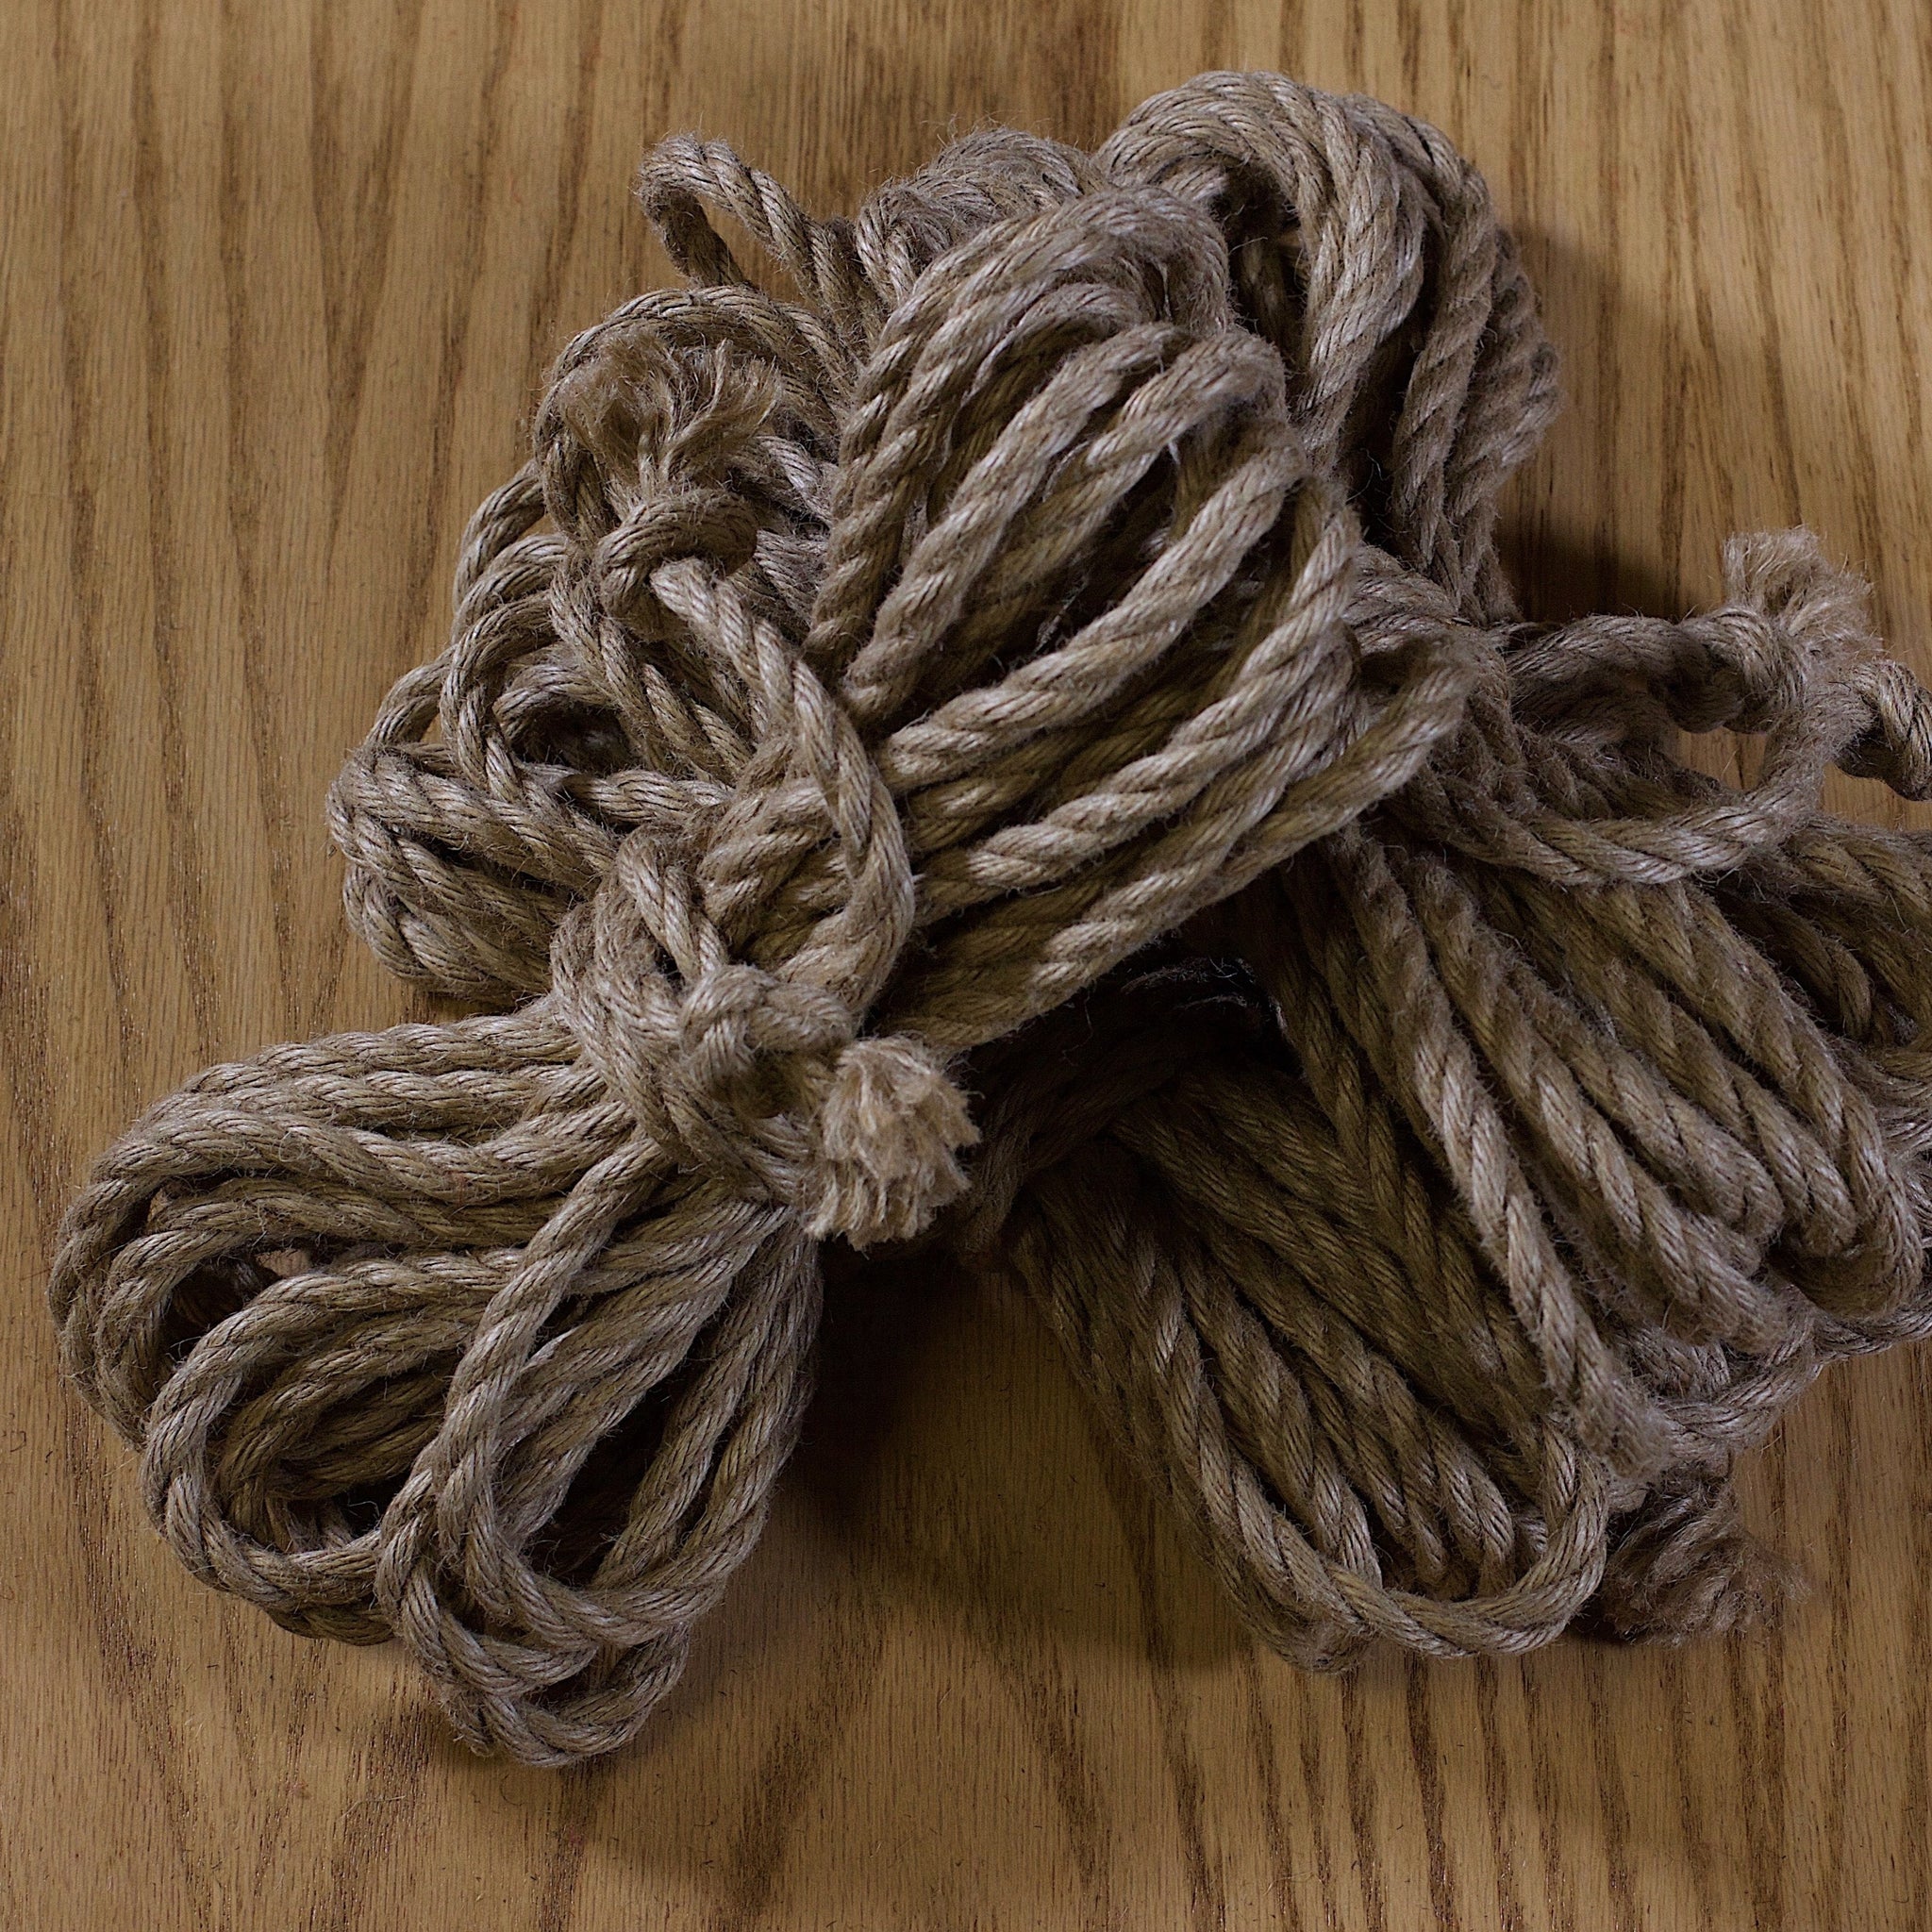 Jute rope Shibari quality by Tension - Beige (Natural) - Tensionmtl